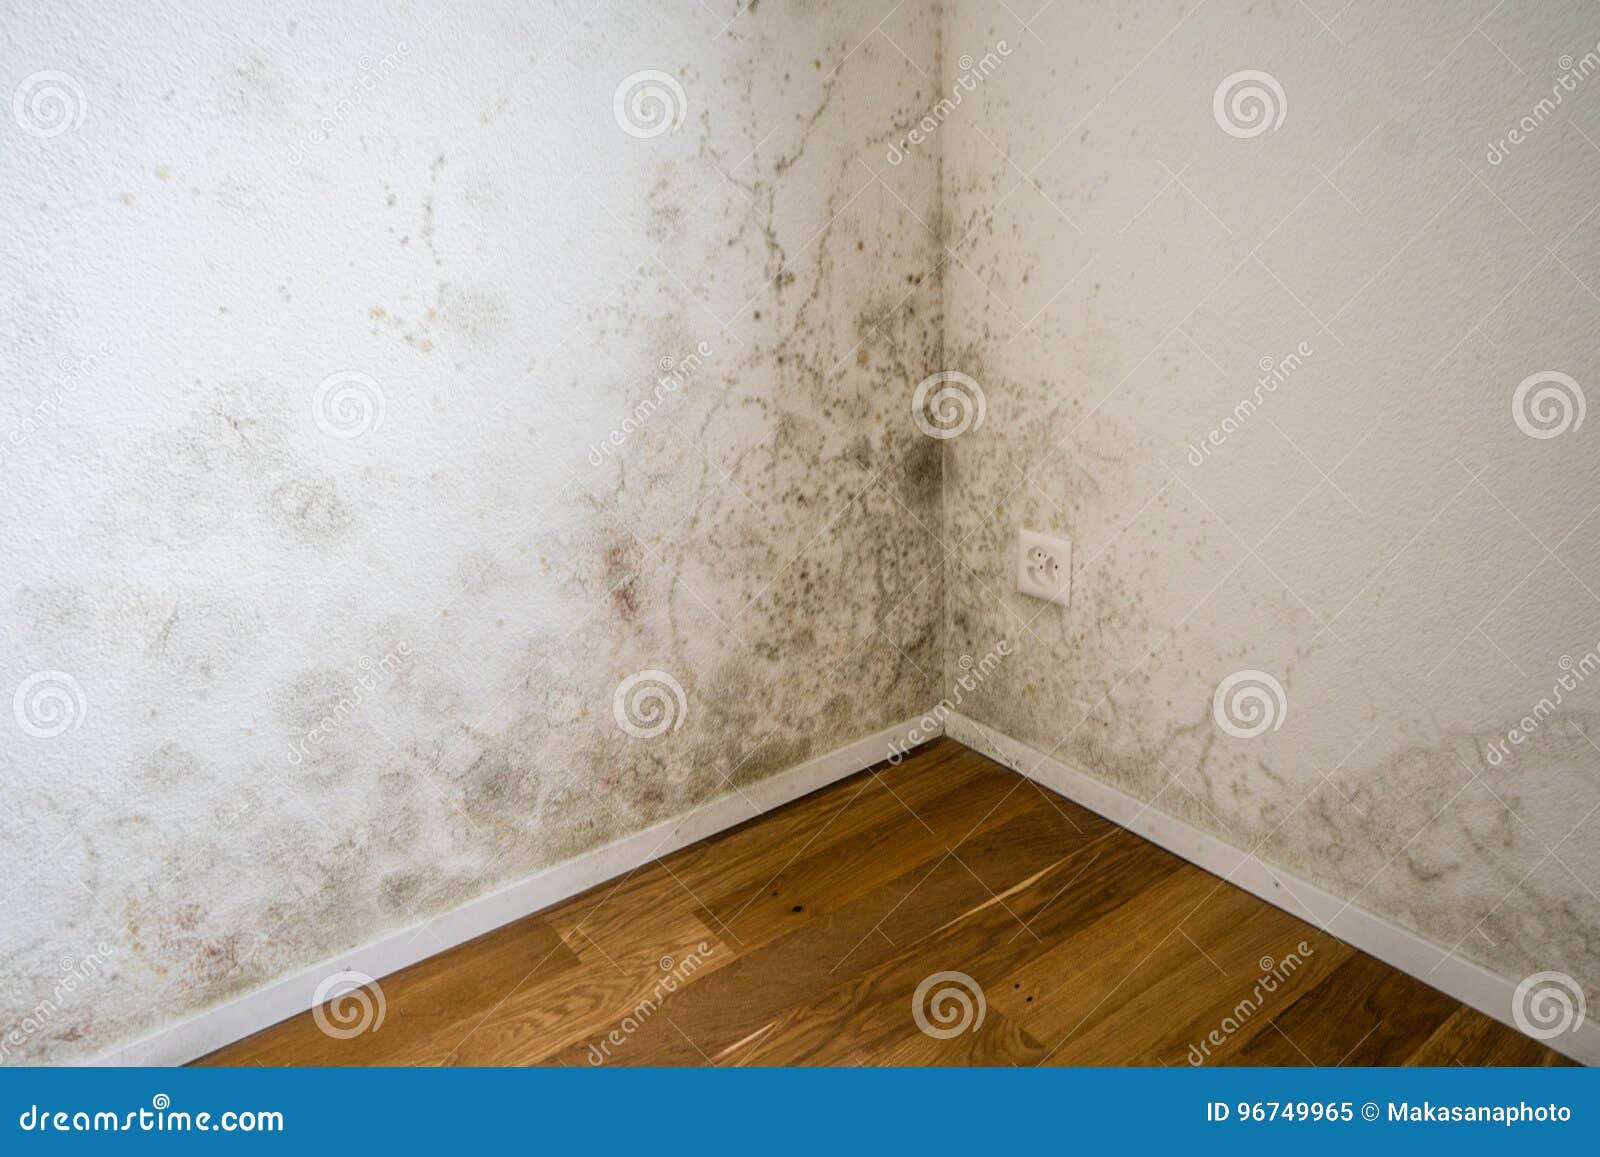 White Apartment Wall With Toxic Mold And Mildew Stock Image